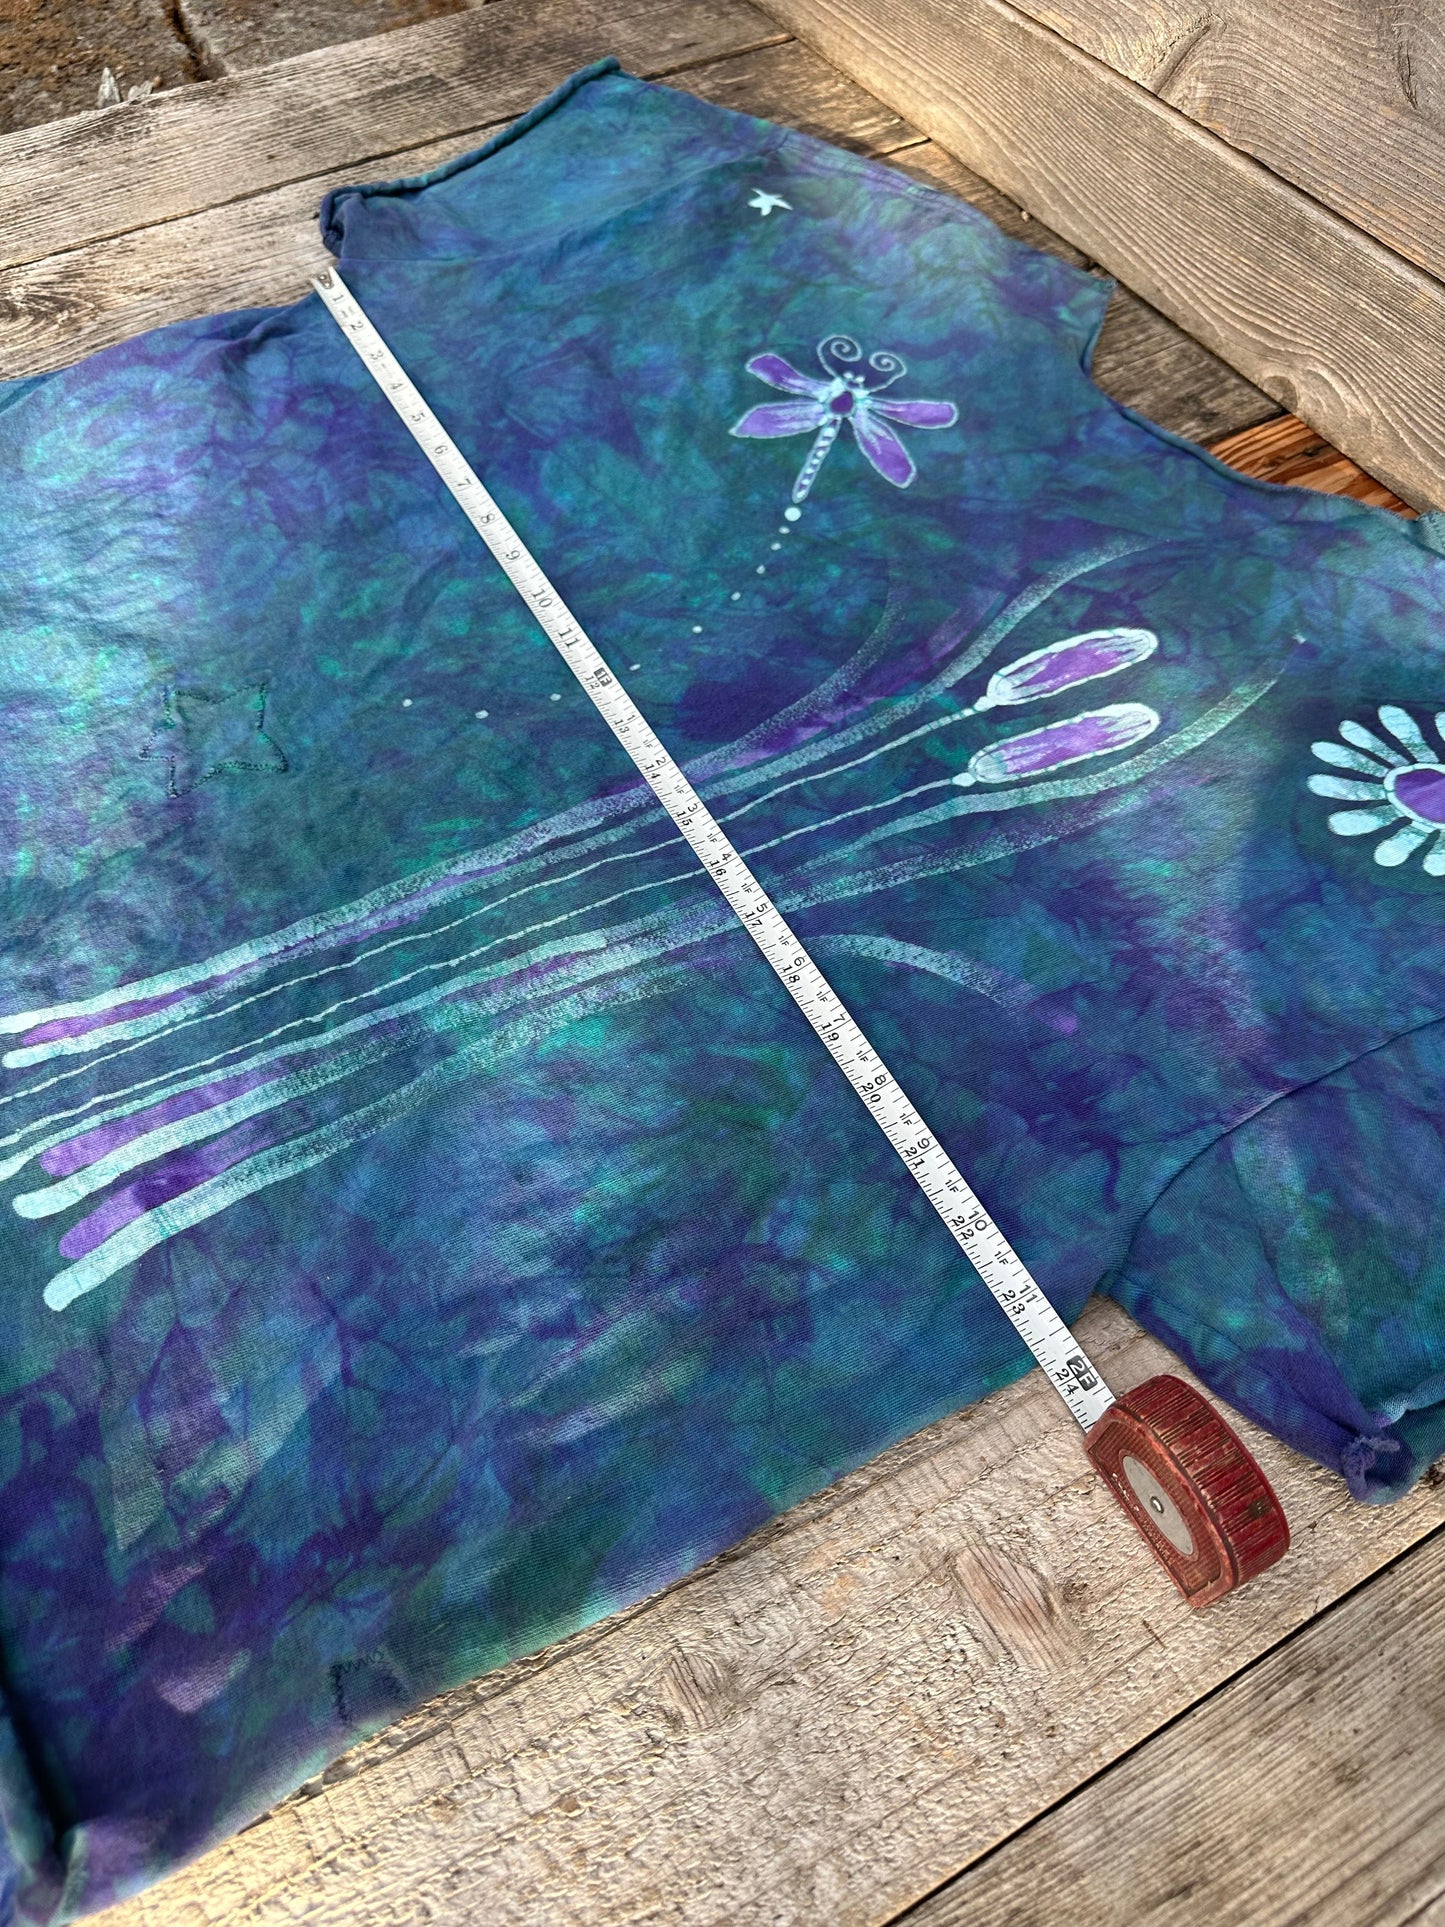 Dragonfly in Teal and Purple Cotton Cropped Crew Tee - Size XL Shirts & Tops Batikwalla by Victoria 